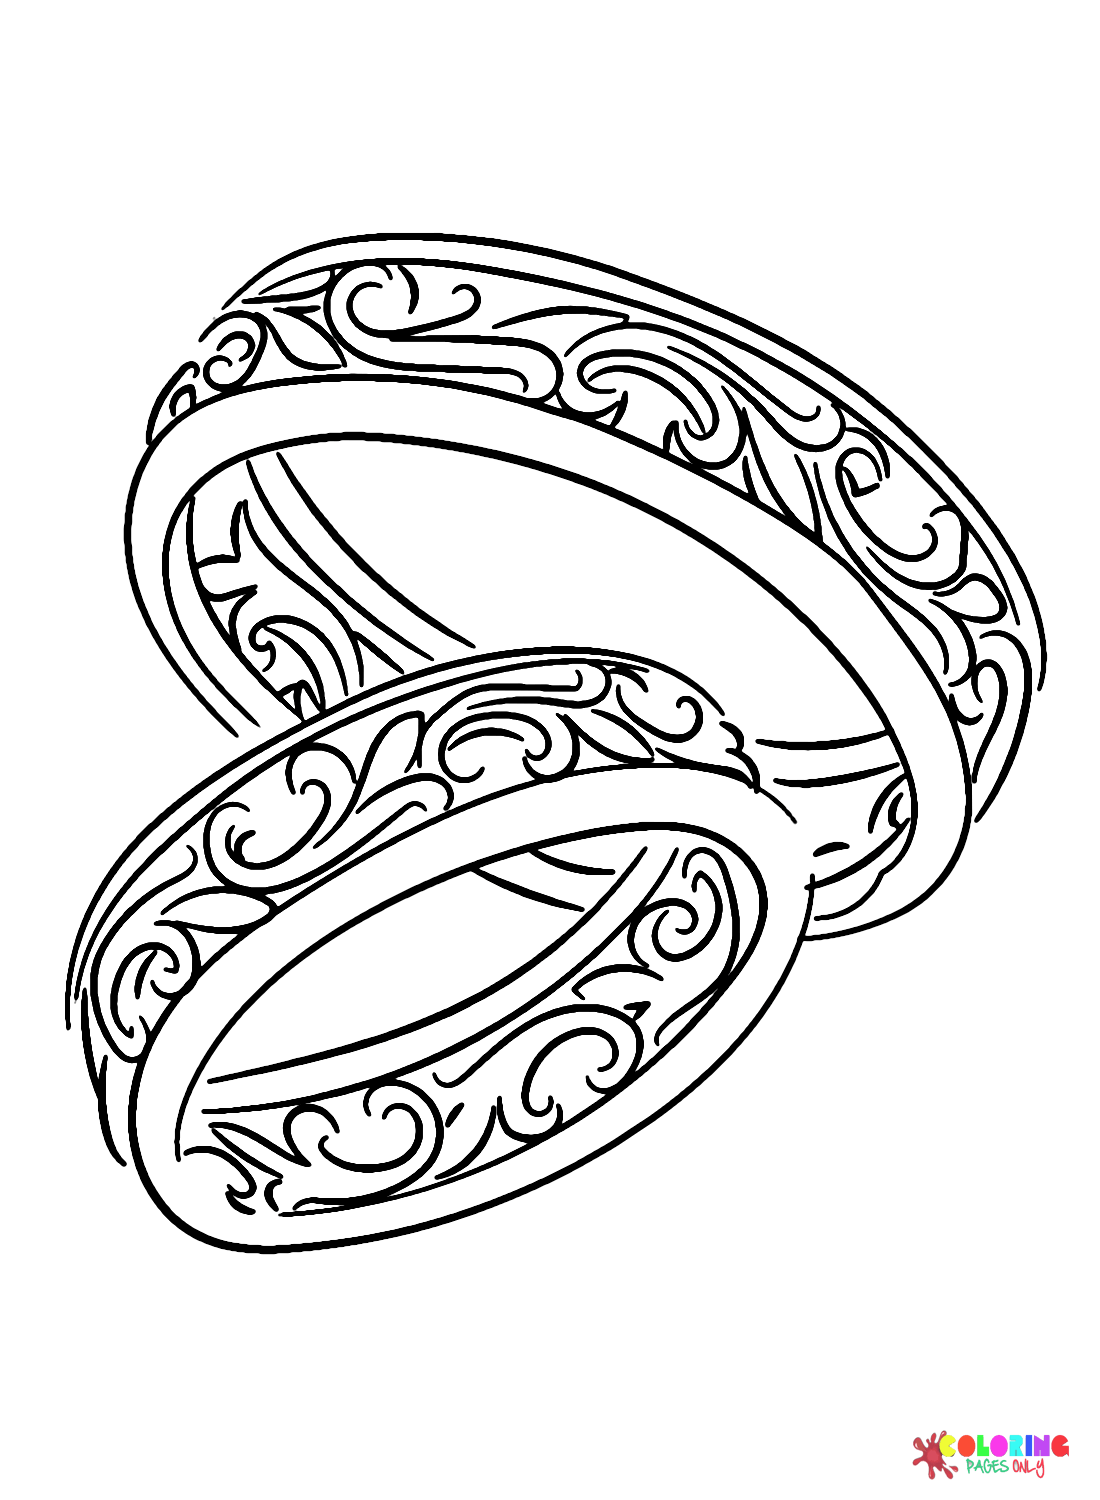 36 Free Printable Wedding Ring Coloring Pages